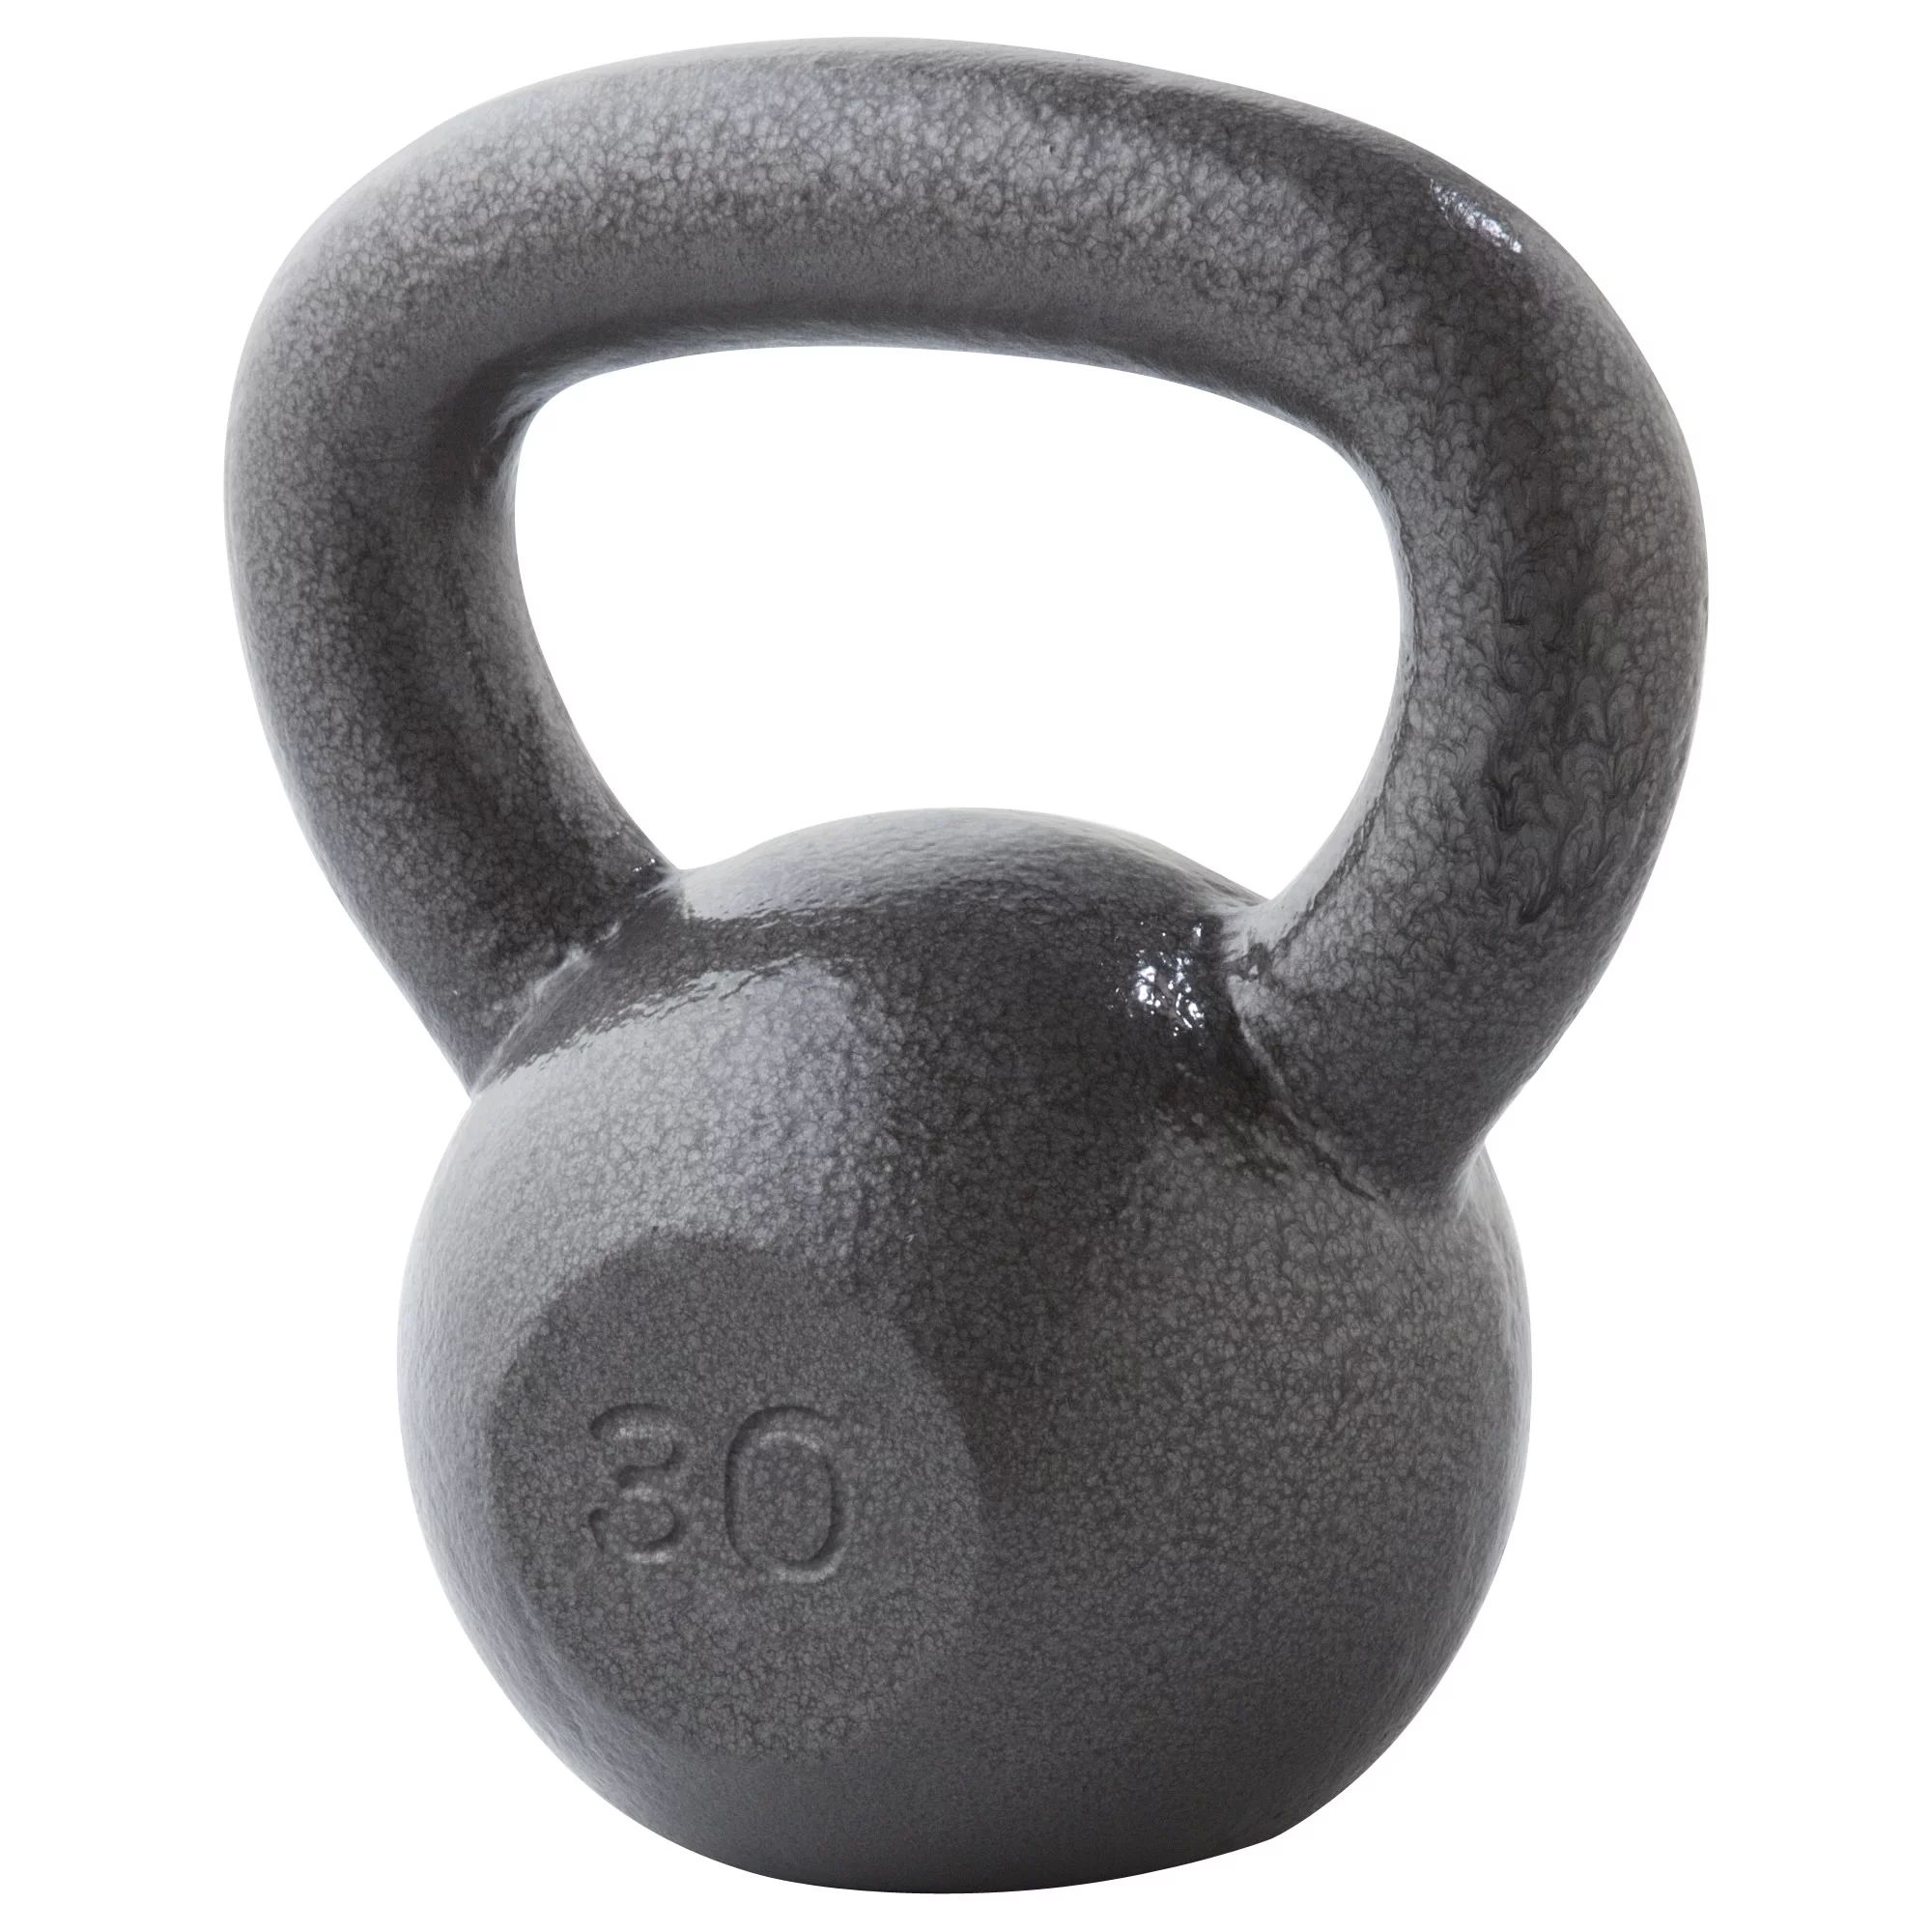 Weider Cast Iron Kettlebell, 10-35 lbs with Extra Wide Grip and Hammertone Finish | Walmart (US)